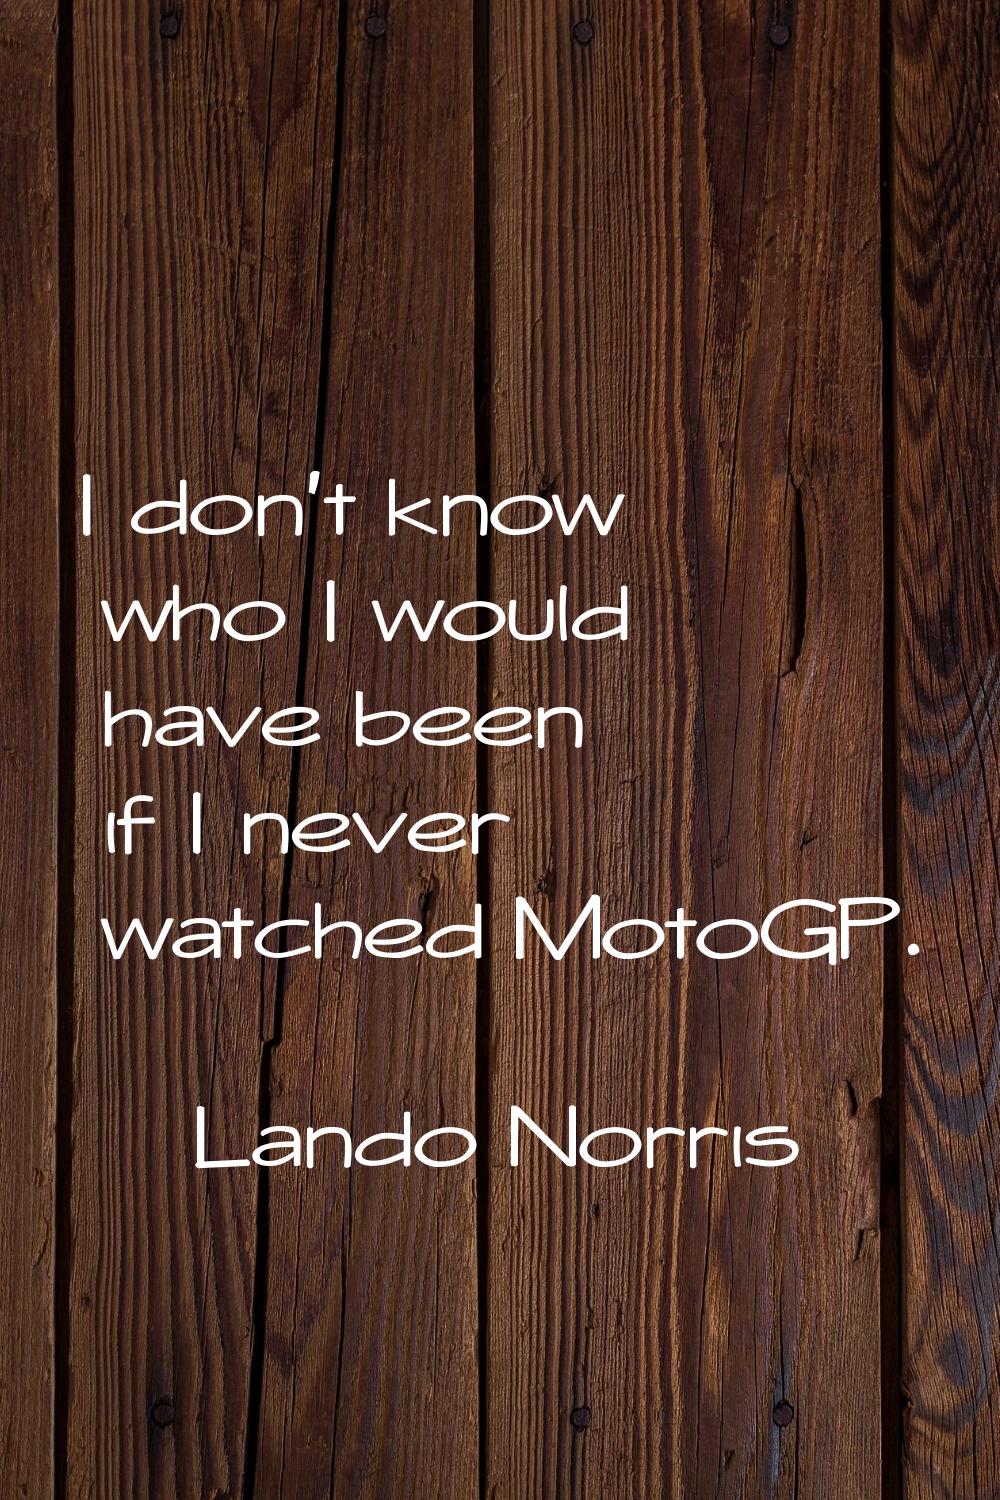 I don't know who I would have been if I never watched MotoGP.